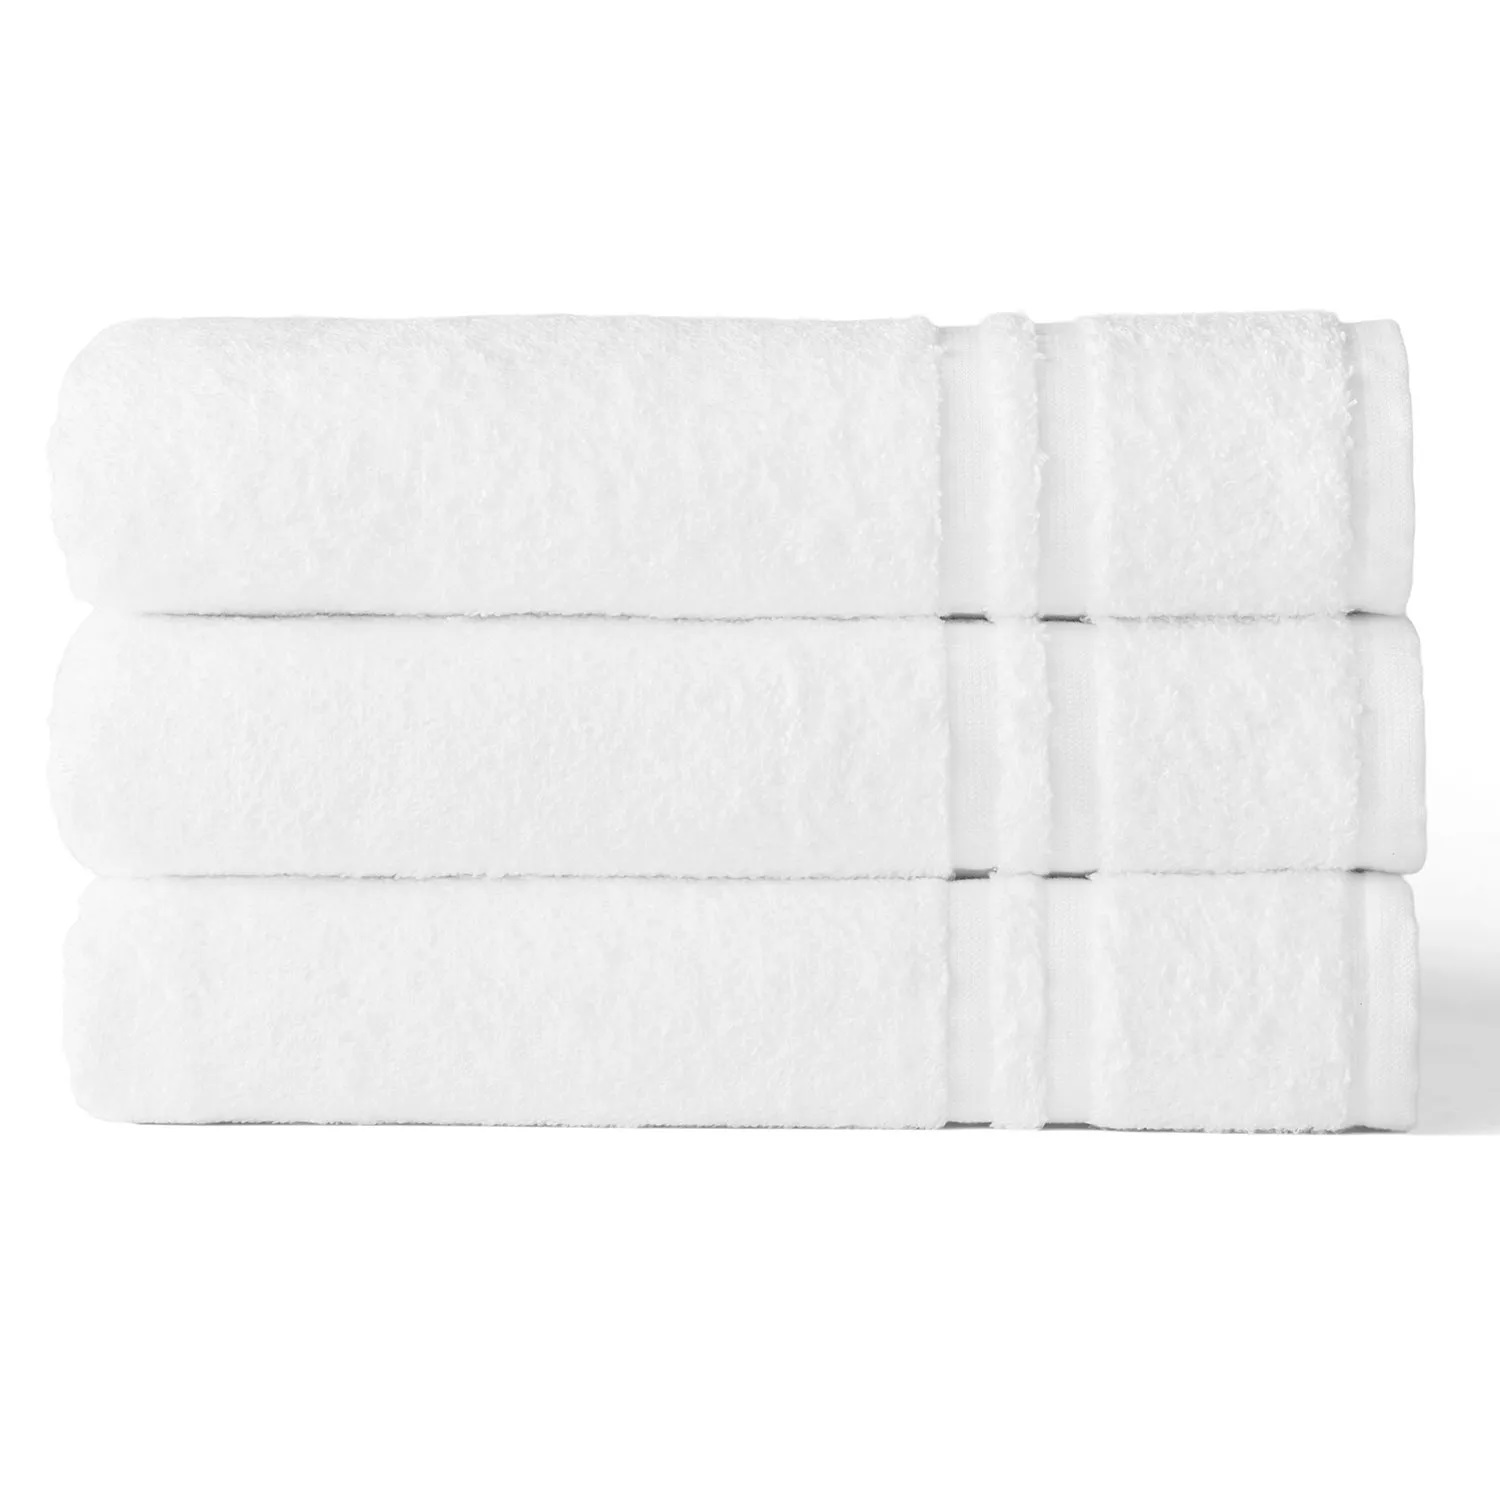 Member's Mark Commercial Hospitality Bath Towels, White (8 Count)